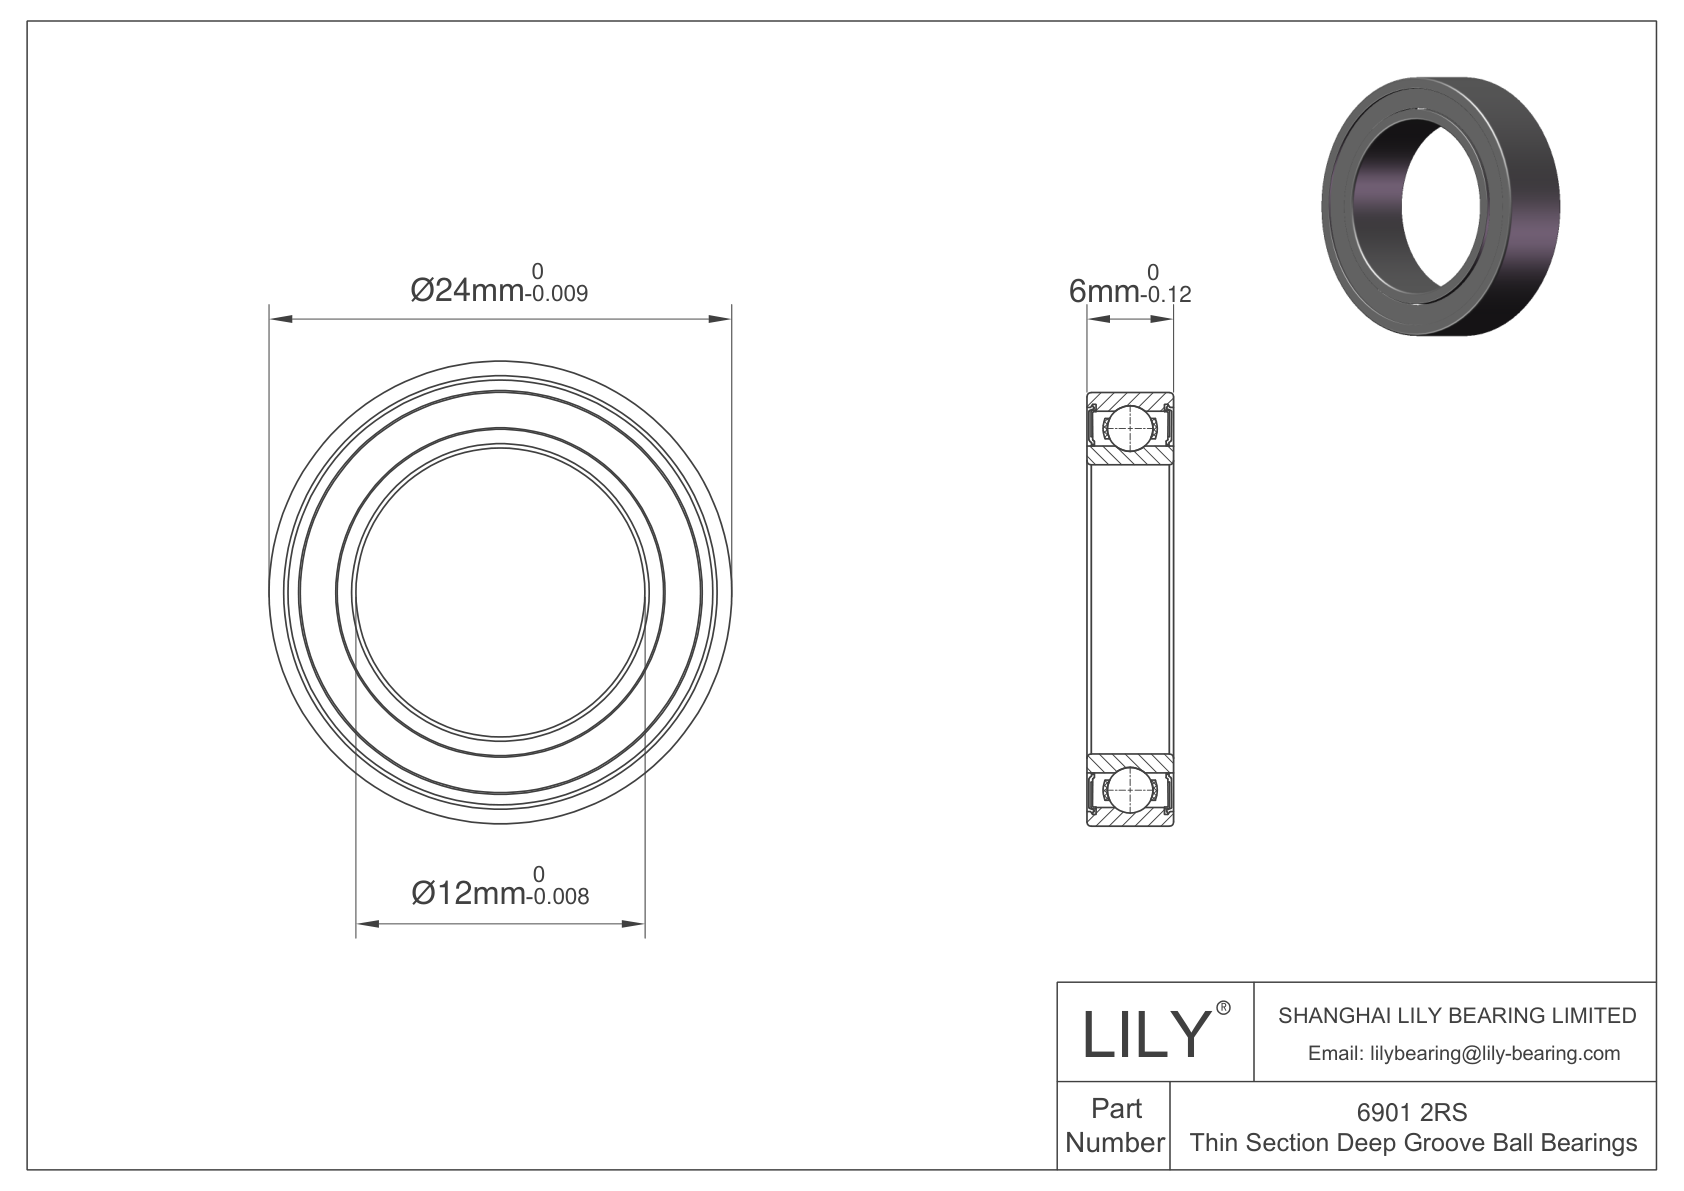 LILY-BS690128-8 POM Coated Bearing cad drawing